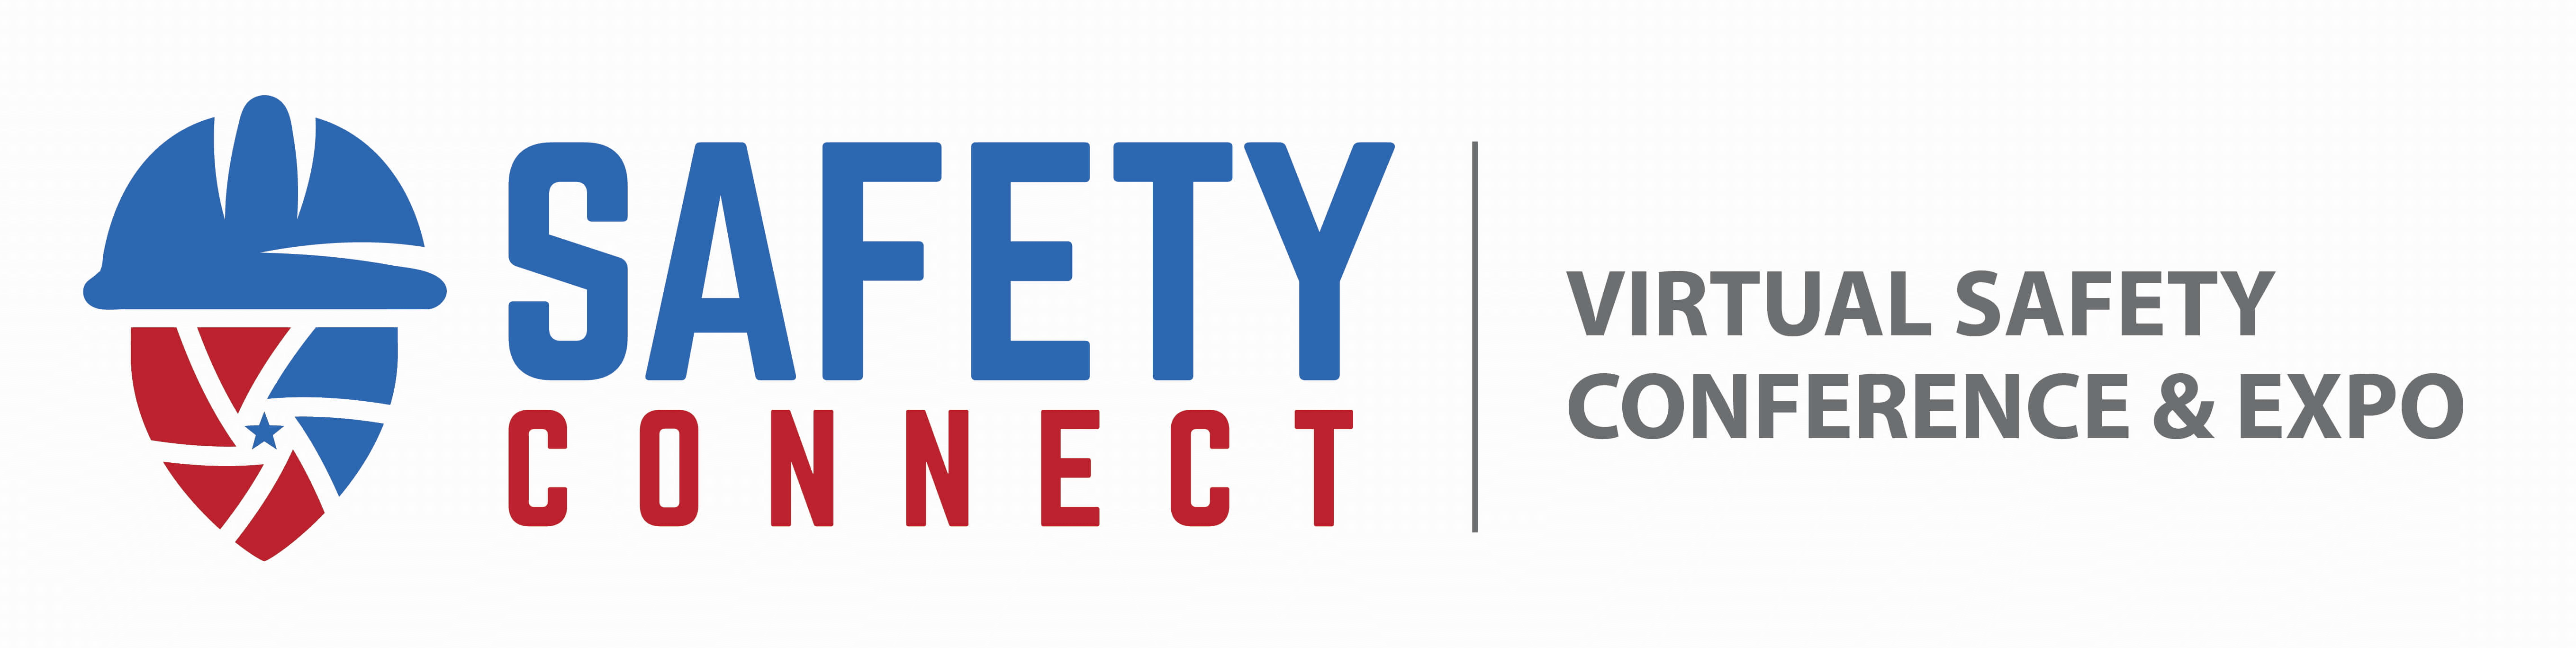 Safety Connect Virtual Conference Expo banner